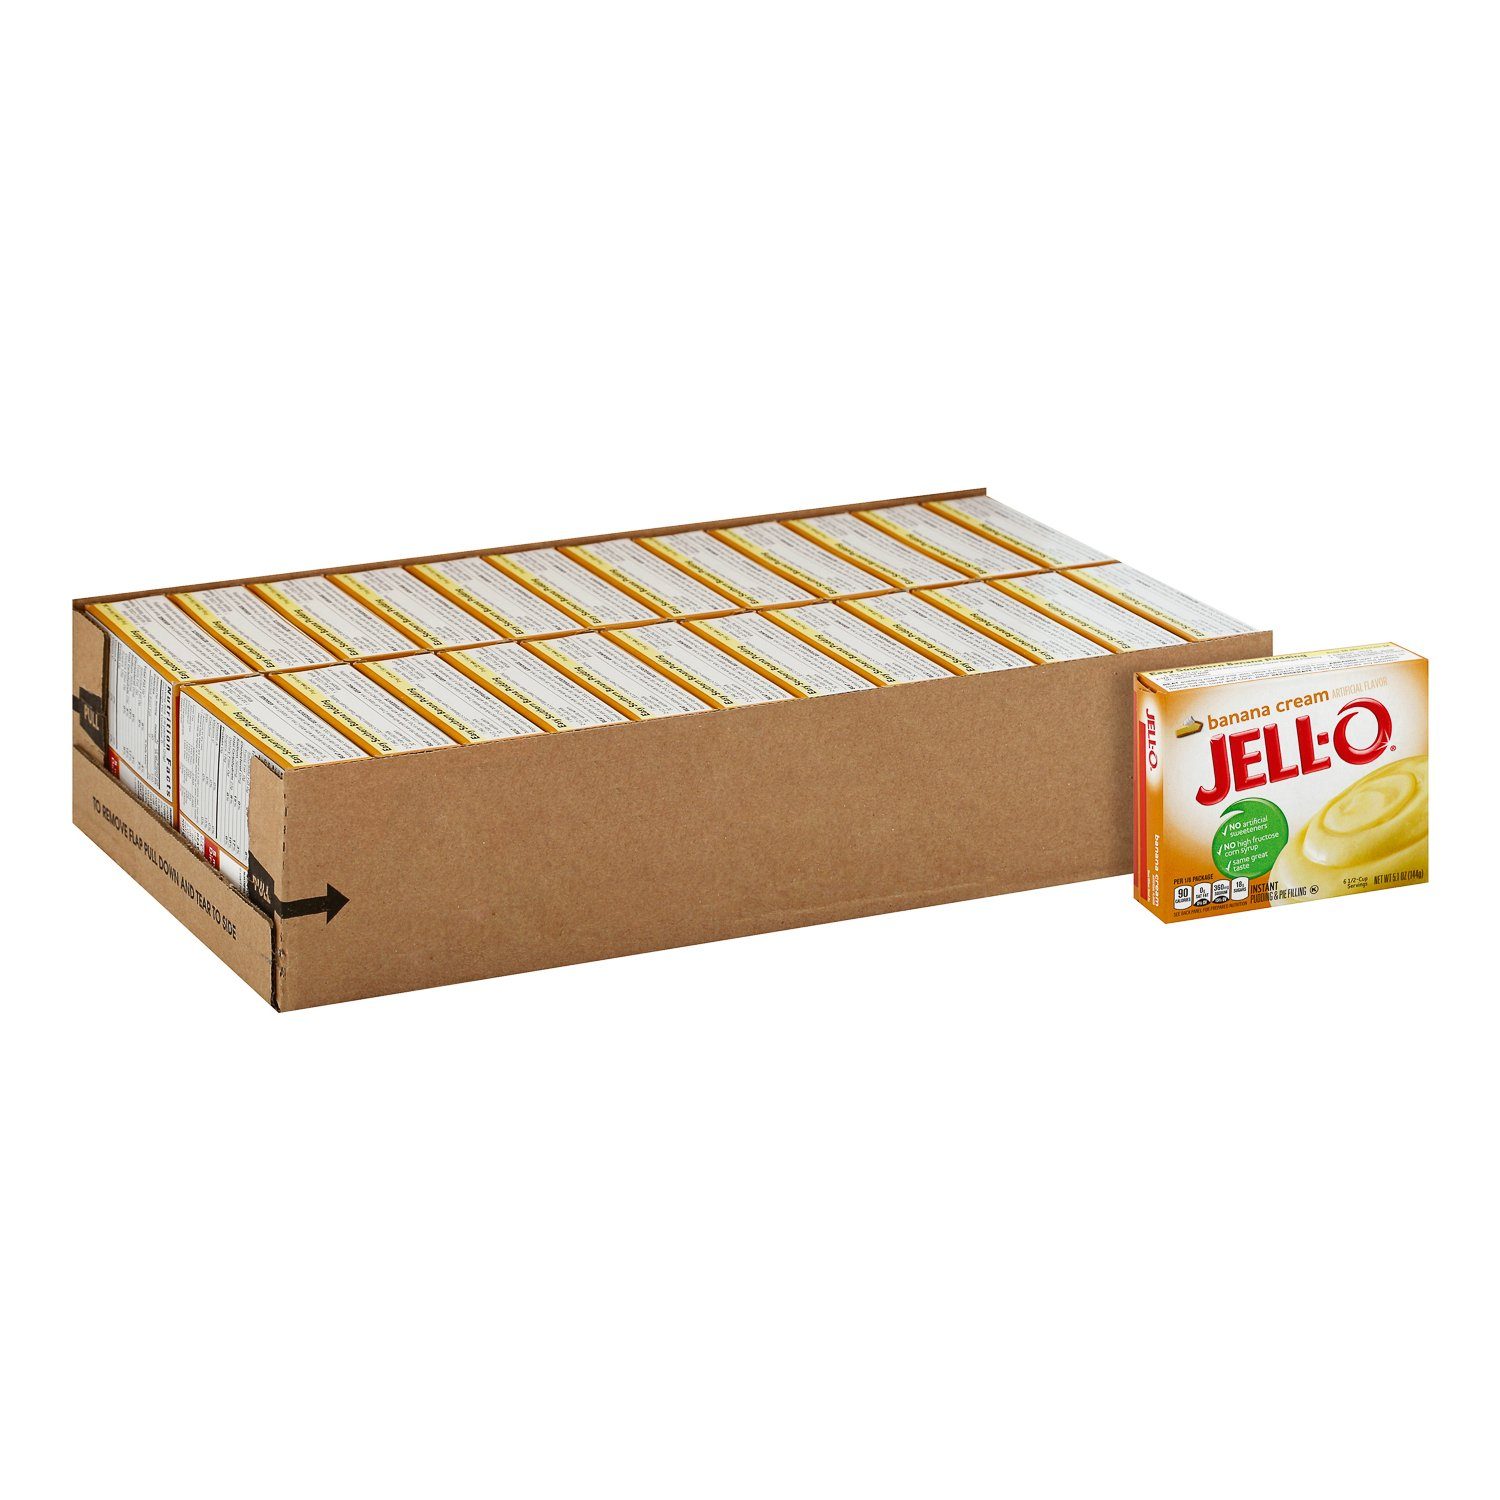 Jell-O Instant Pudding & Pie Filling Mixes Jell-O Banana Cream 5.1 Oz-24 Count 